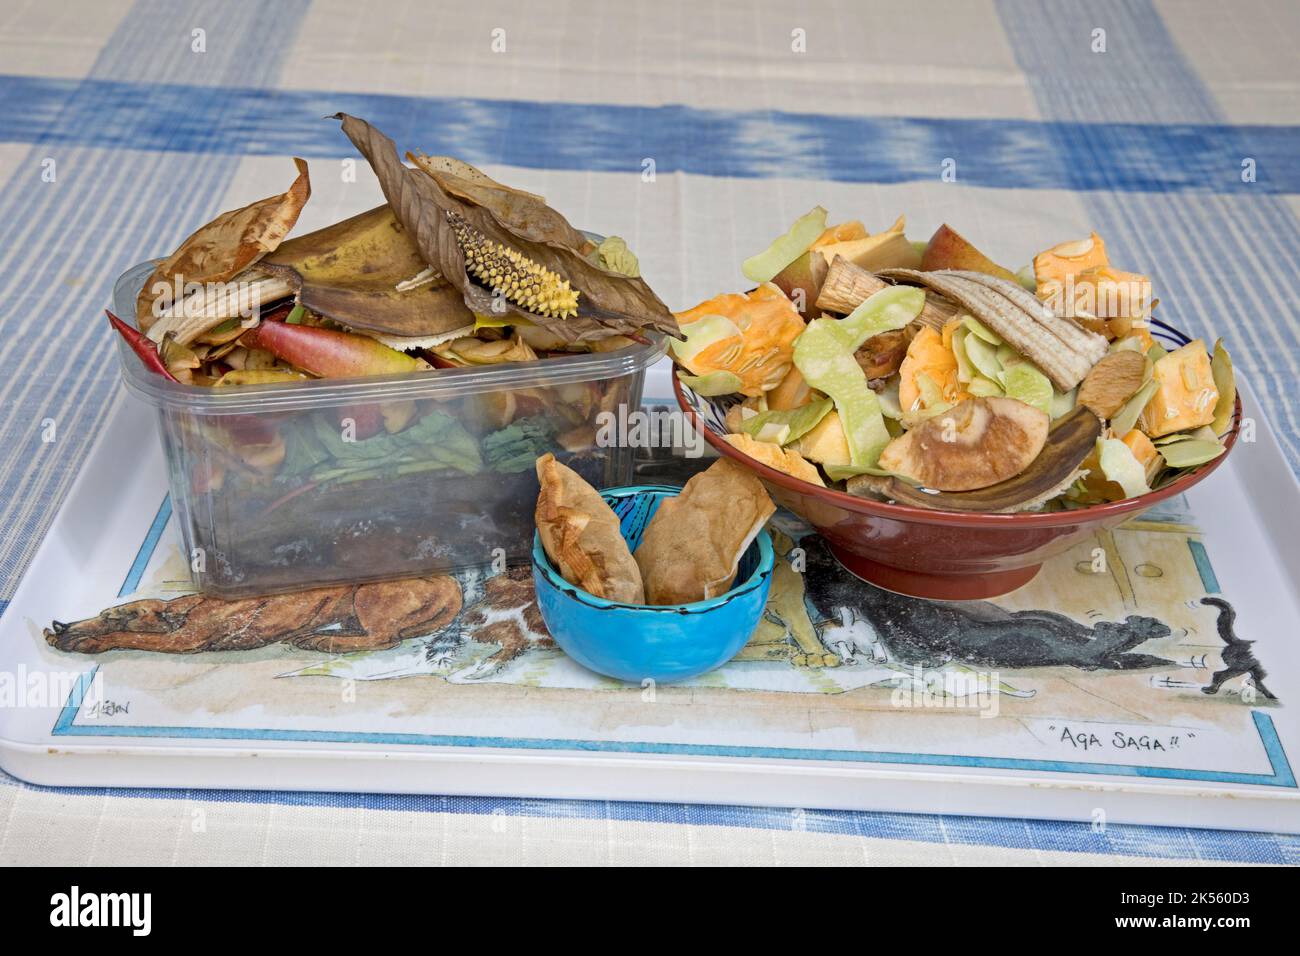 Containers of food waste set aside for composting Stock Photo